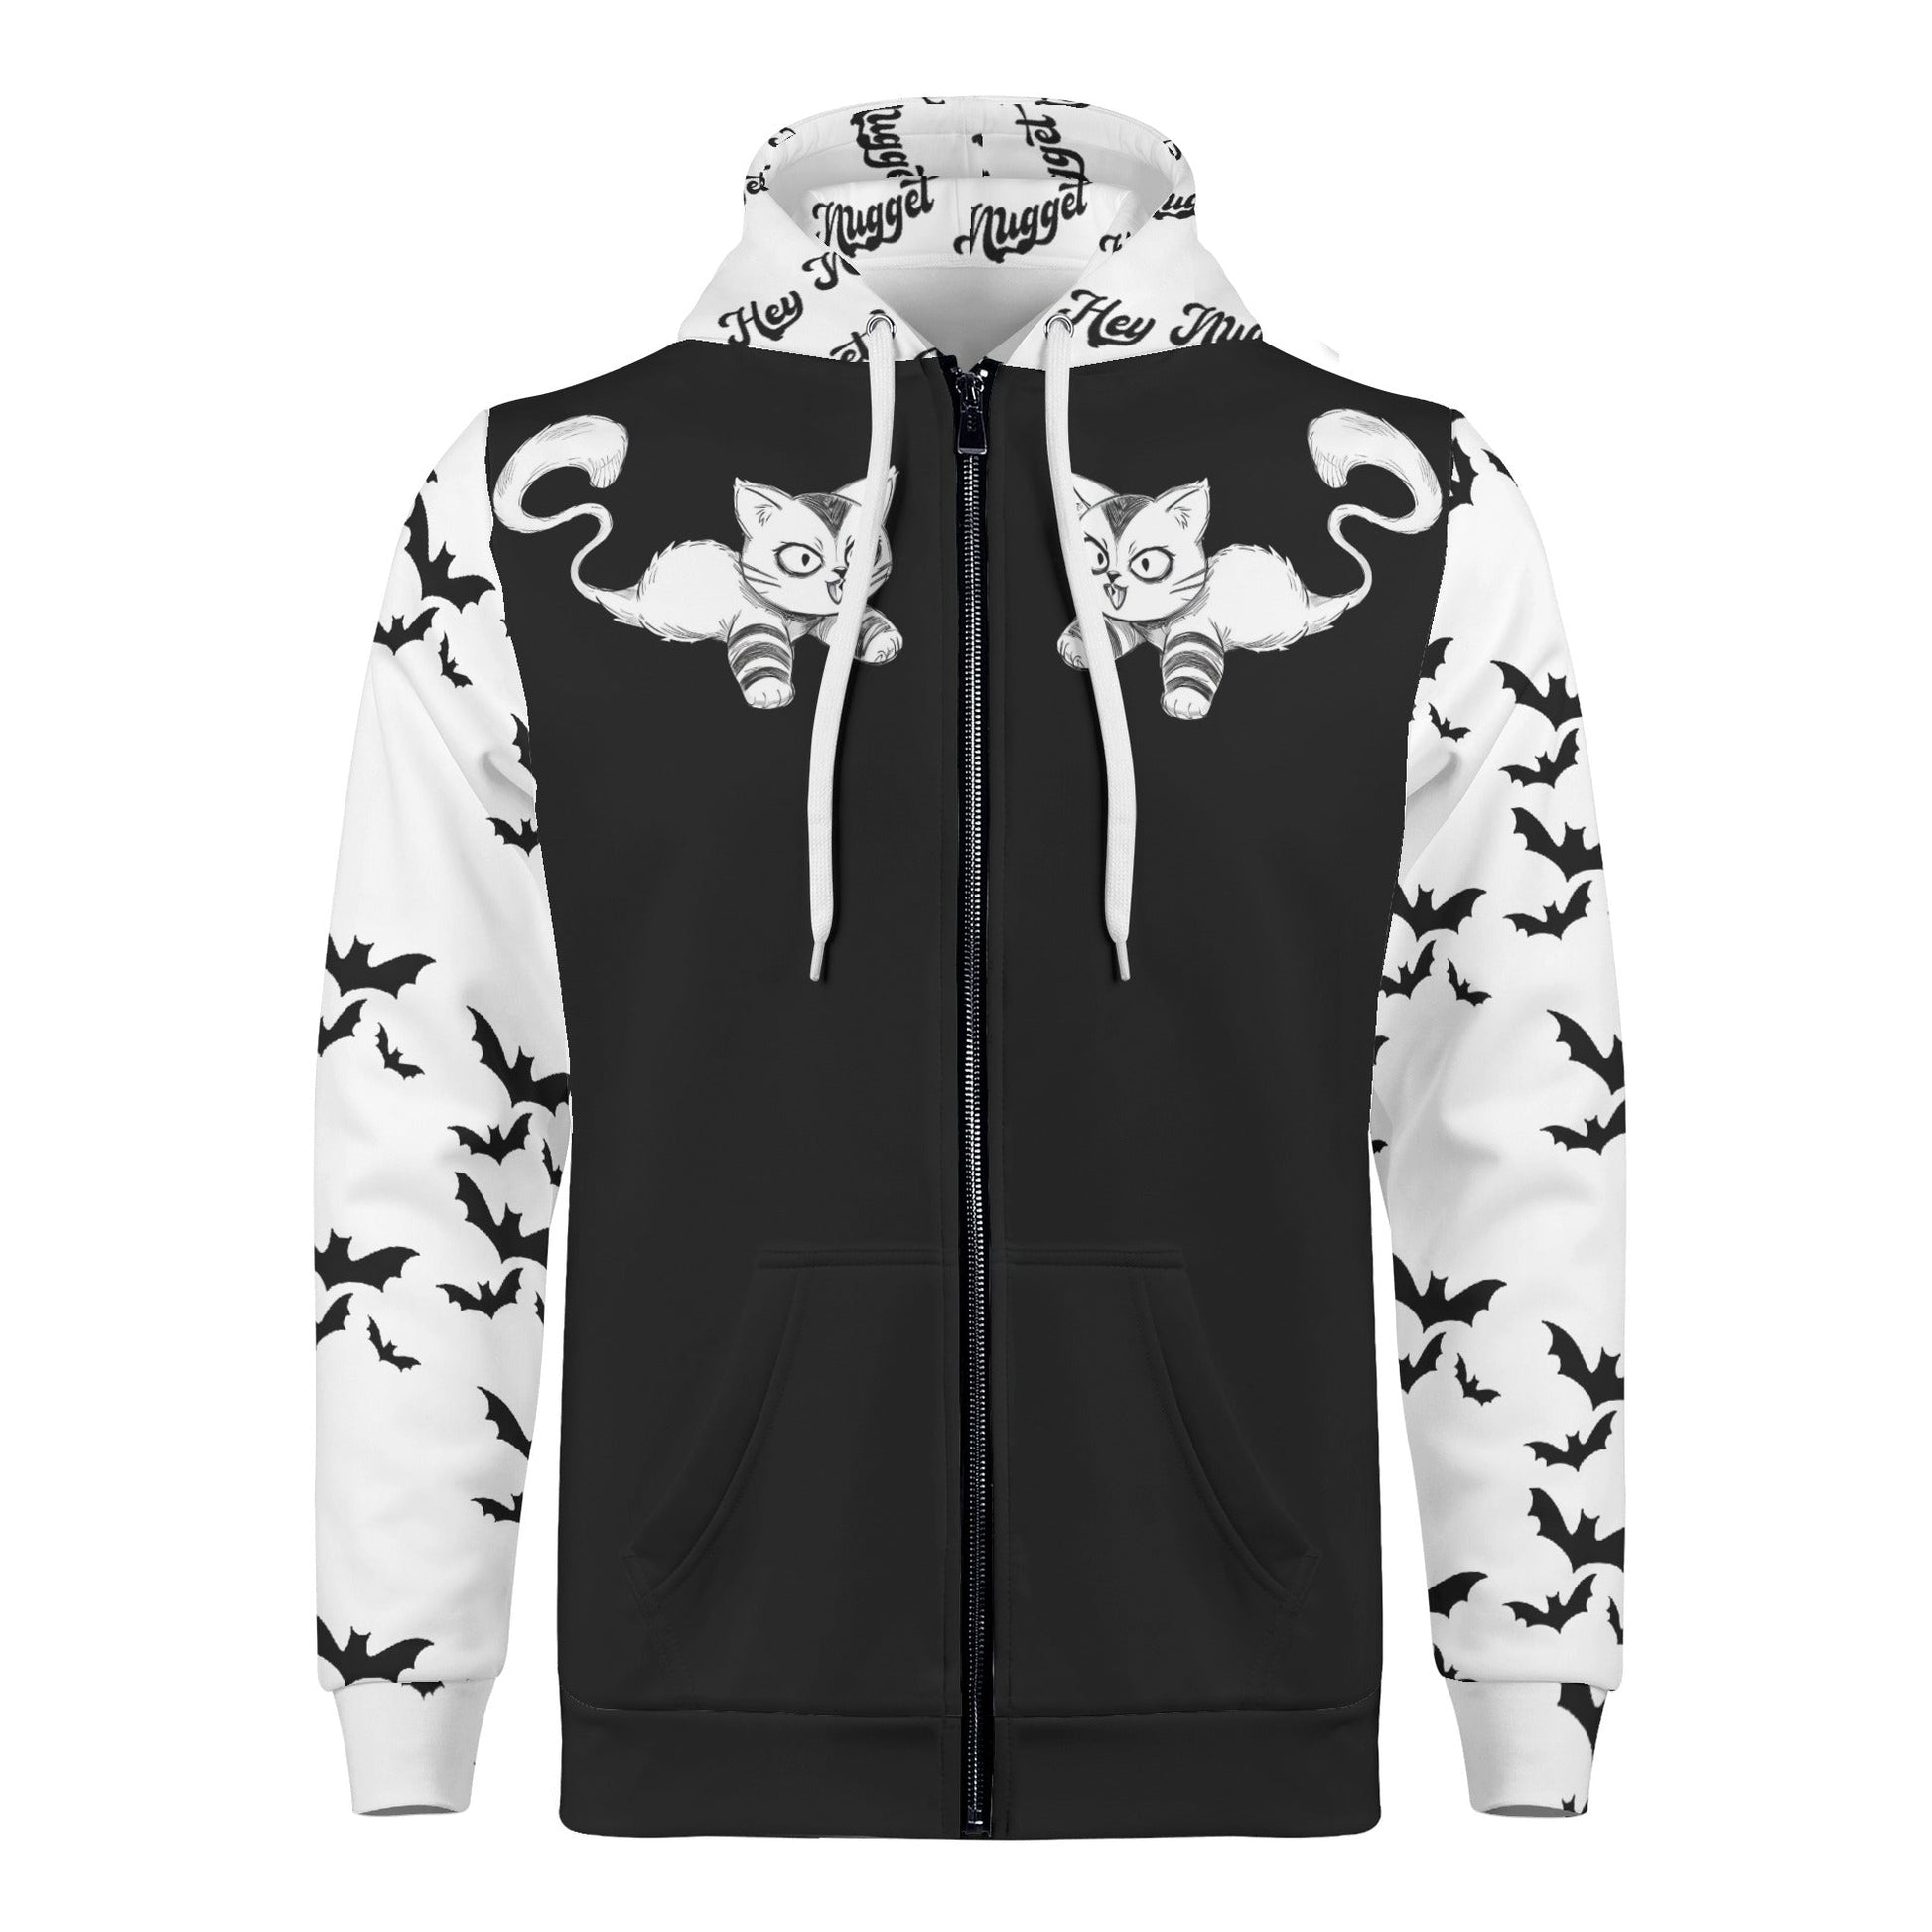 Stand out  with the  Dark Night Mens Zip Hoodie  available at Hey Nugget. Grab yours today!